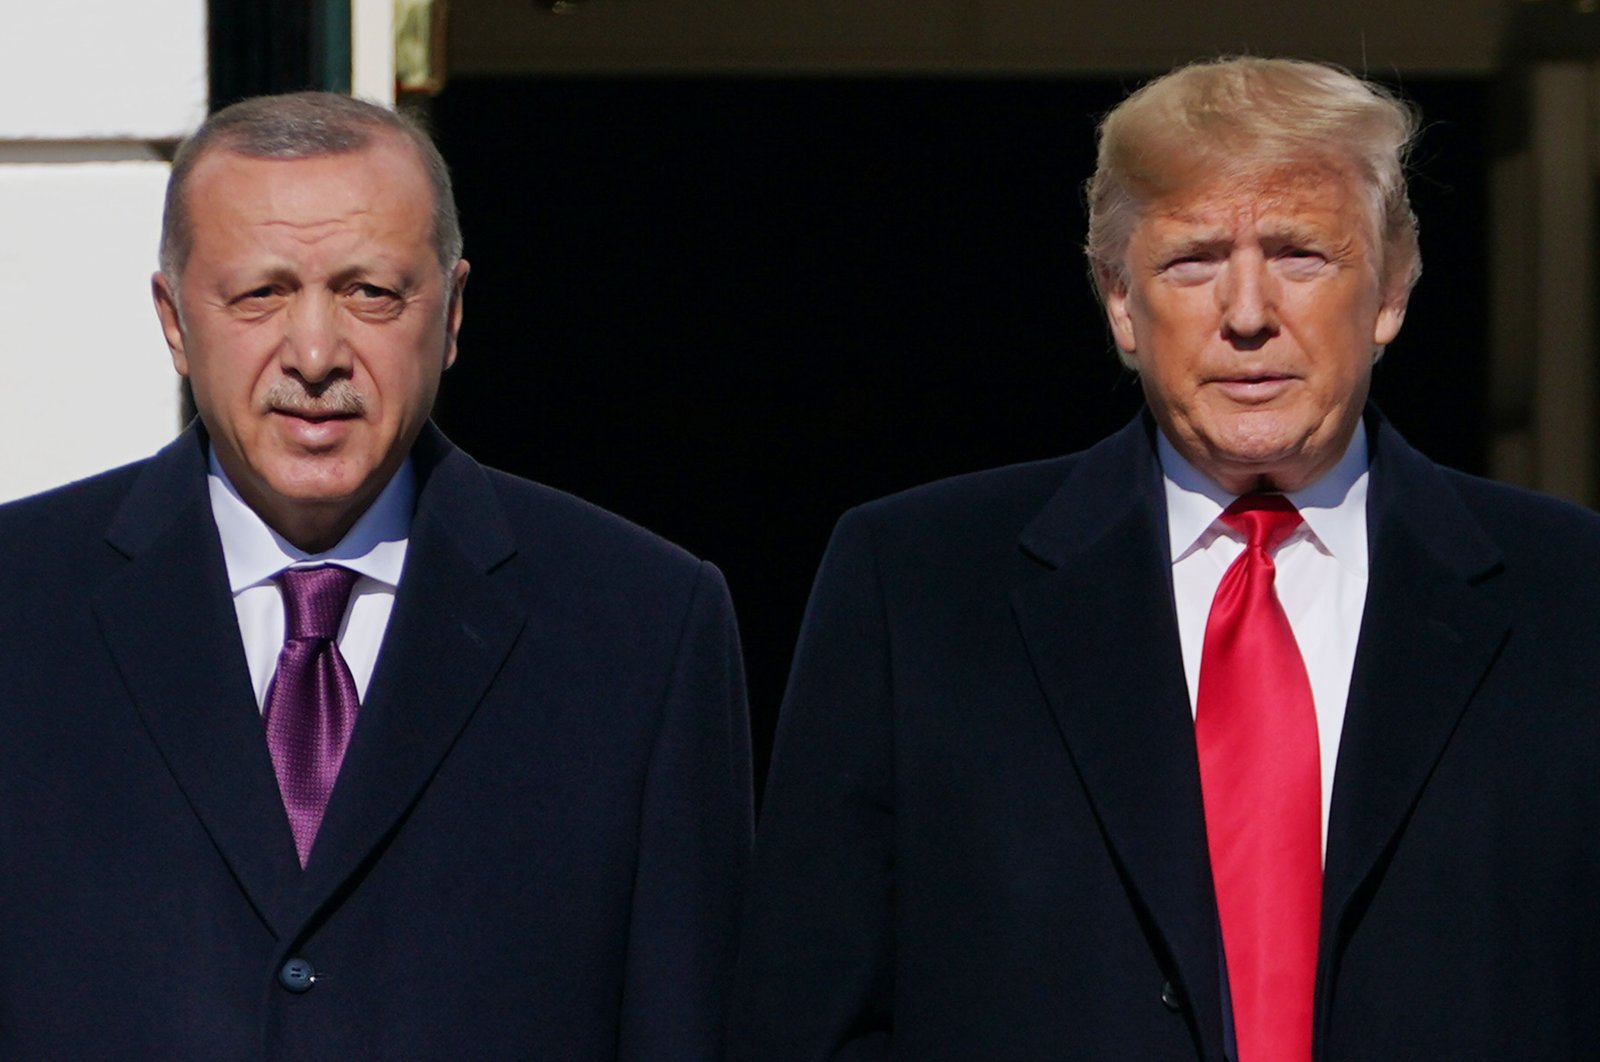 President Recep Tayyip Erdoğan is greeted by U.S. President Donald Trump upon arrival outside the White House in Washington, D.C., U.S., Nov. 13, 2019. (AFP Photo)